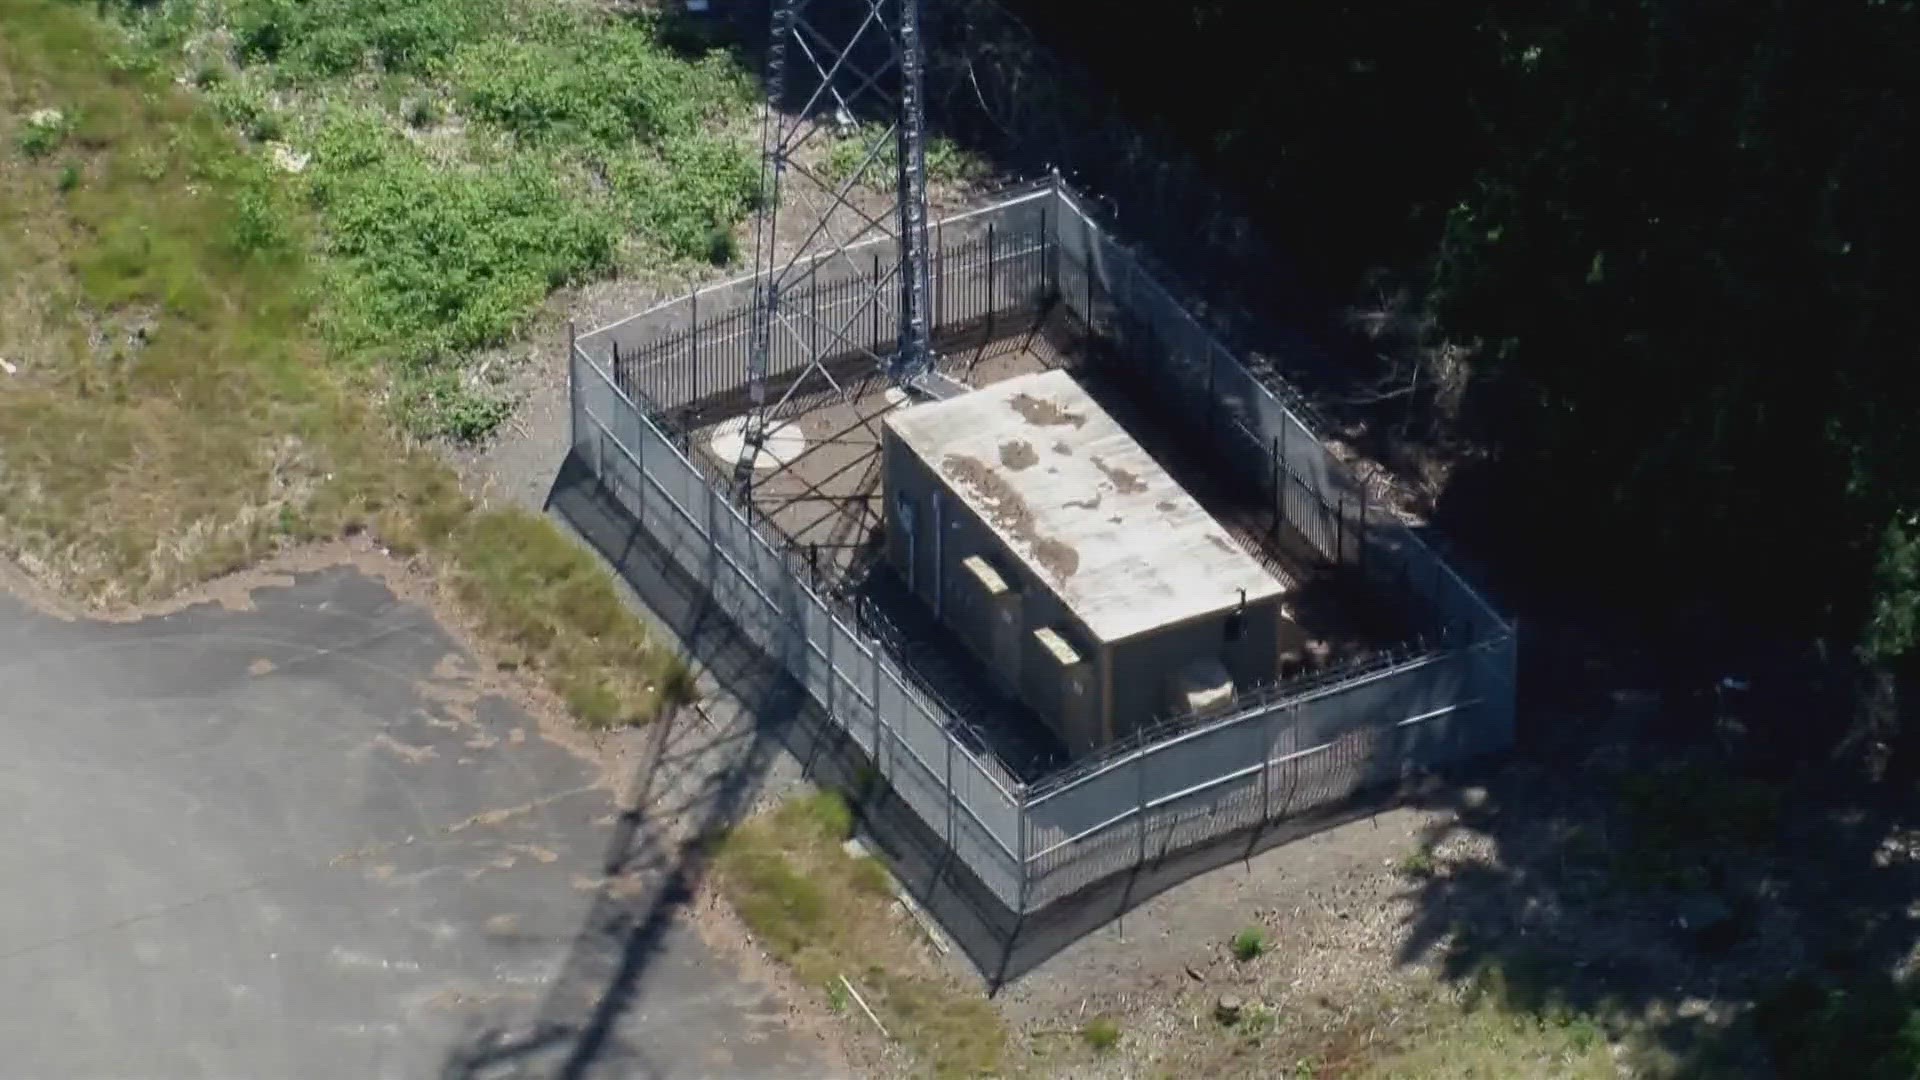 The vault supplies a tower that is believed to provide communications for South Sound 911. Police found a grinding tool and one man was armed with a gun.